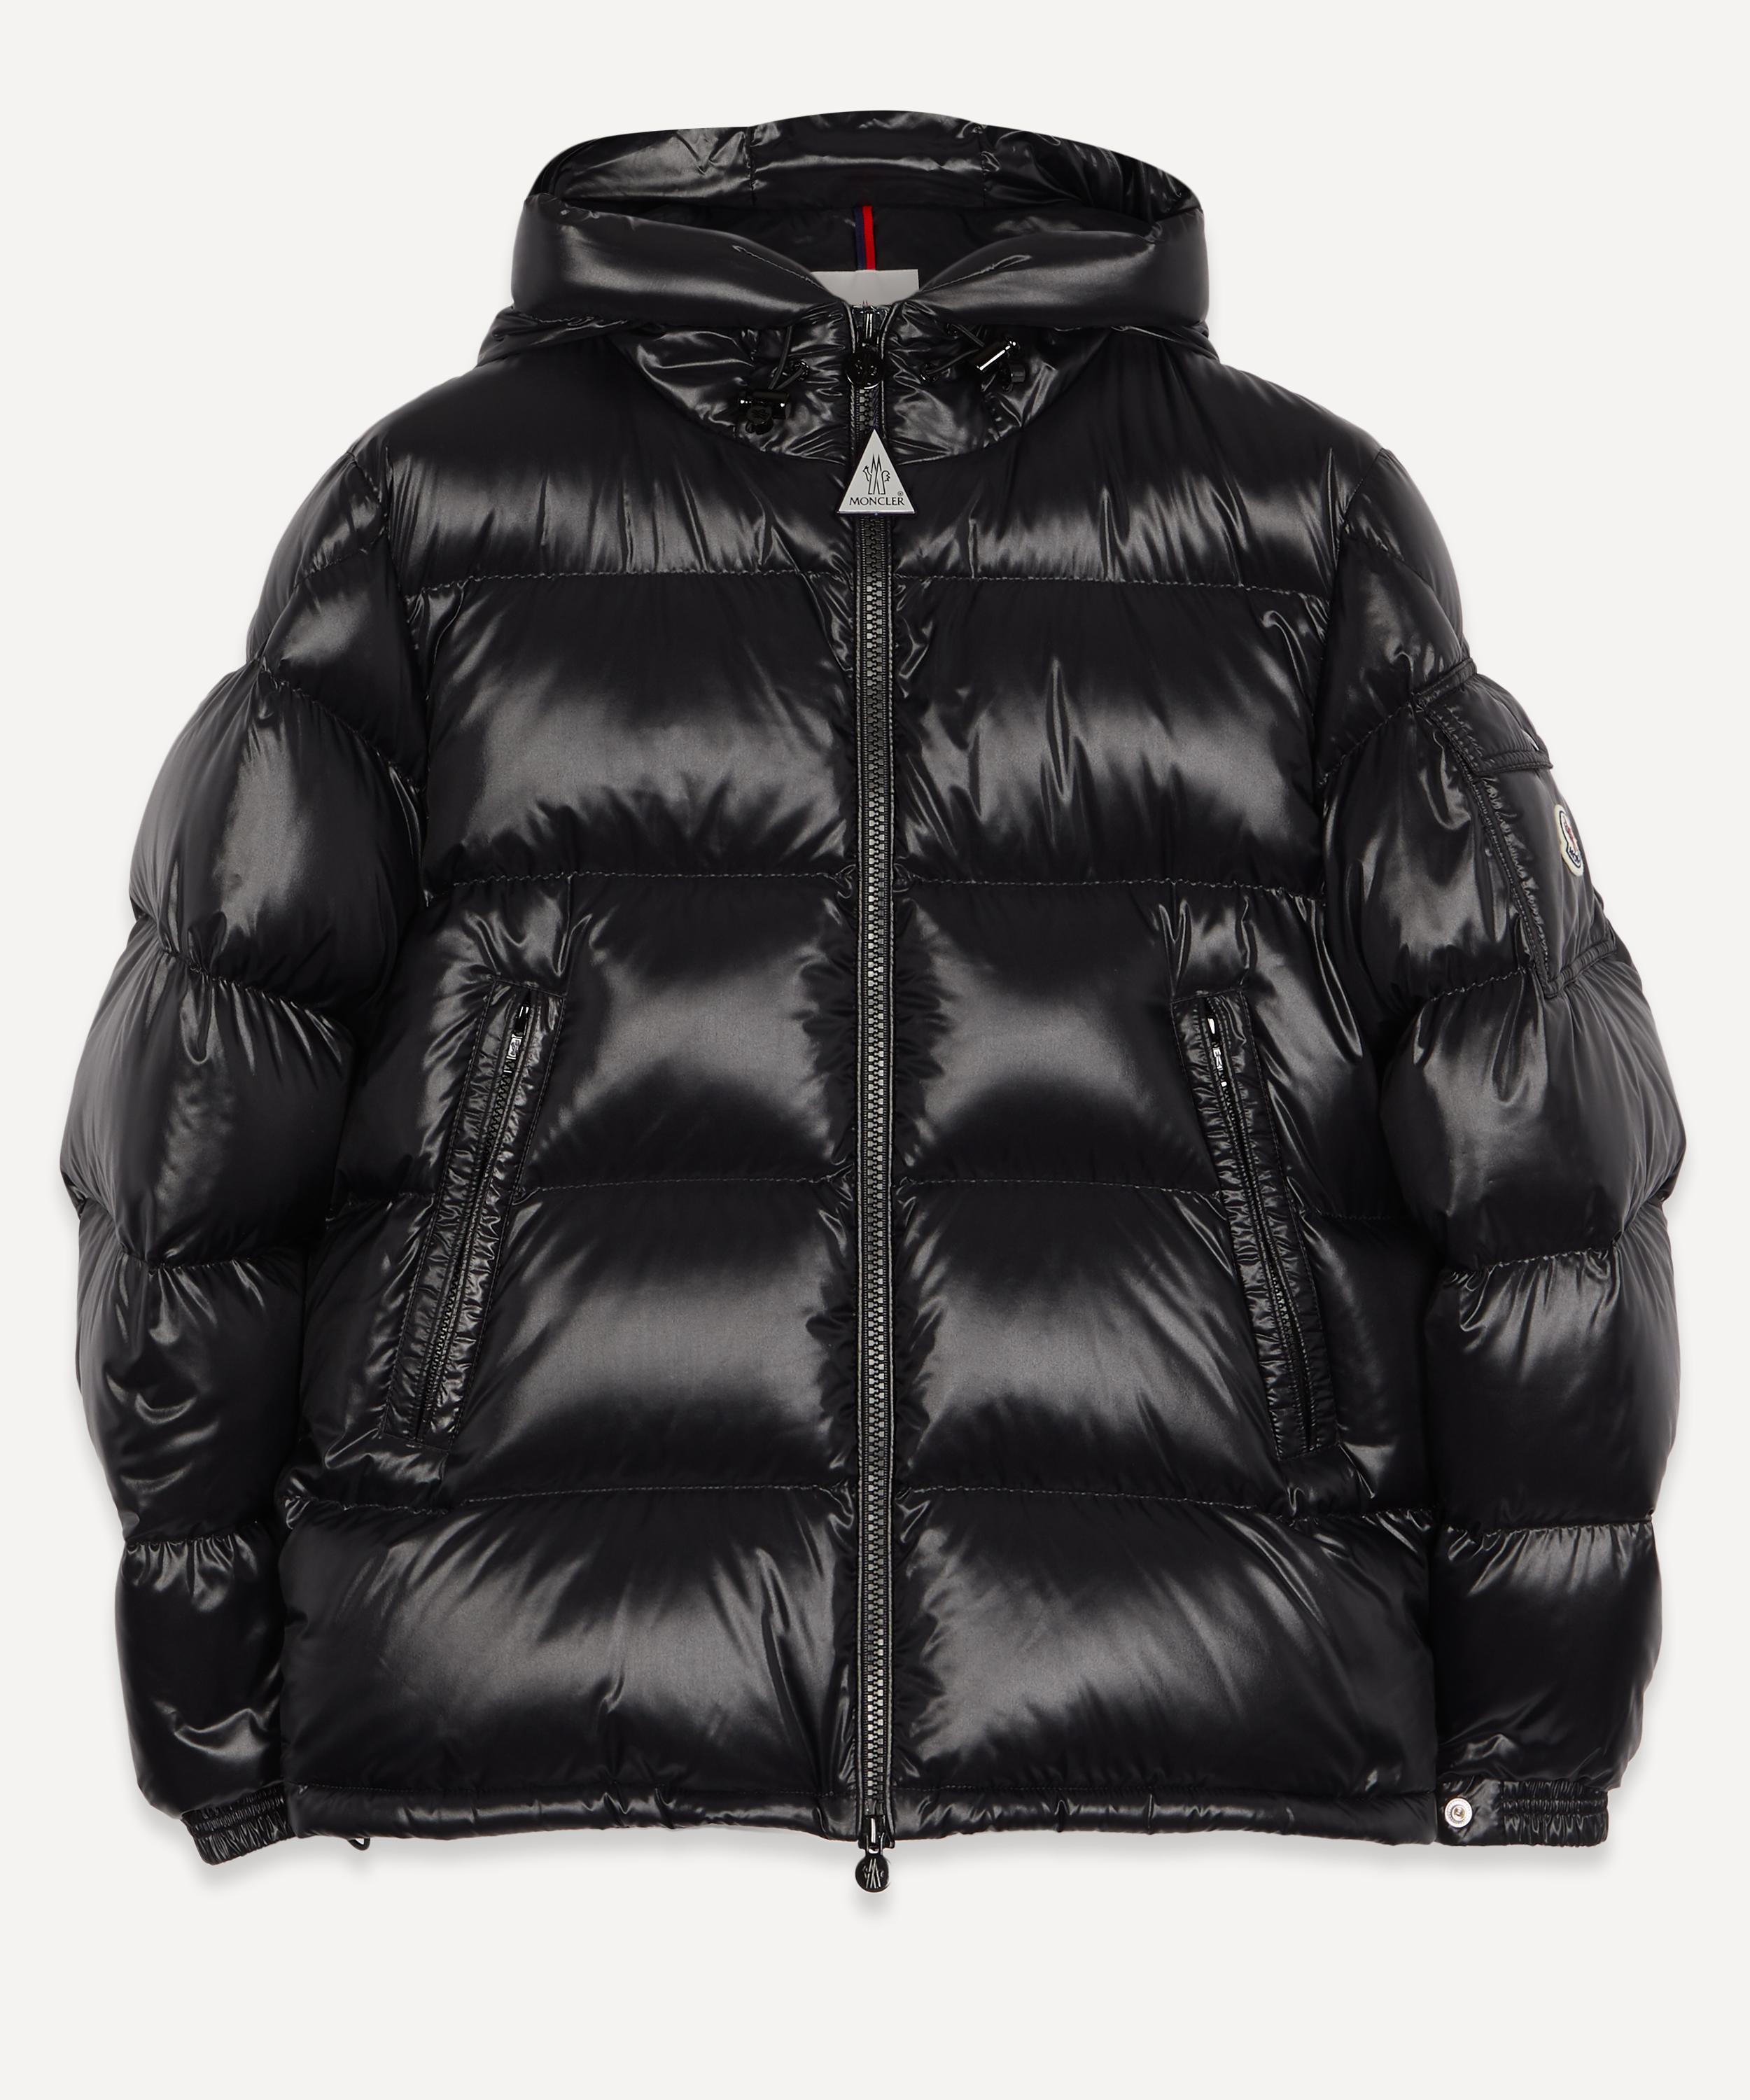 Moncler Synthetic Maya Quilted Jacket in Black for Men - Save 80% - Lyst